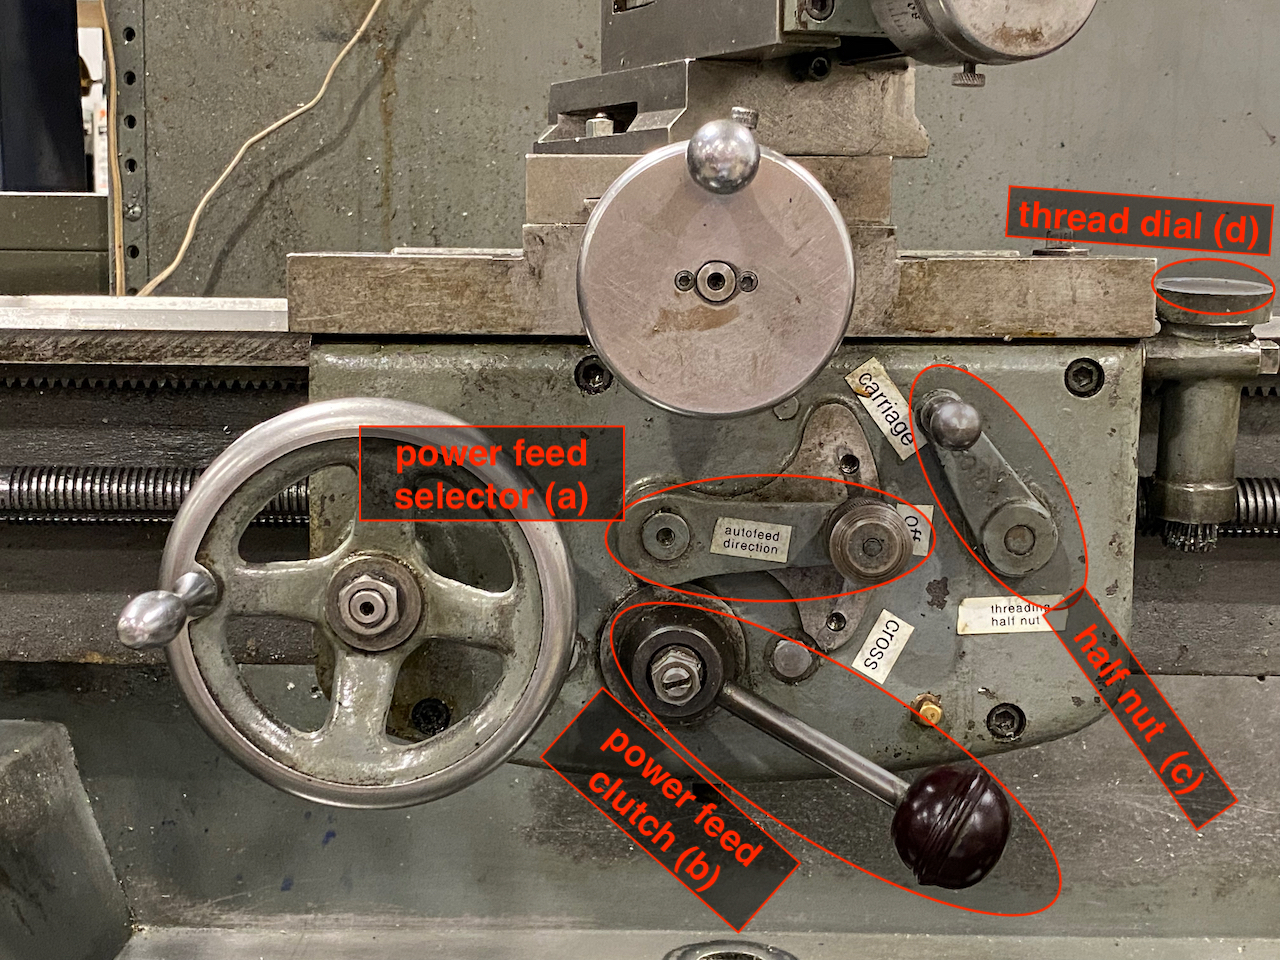 Overview of the apron controls on the Logan lathe